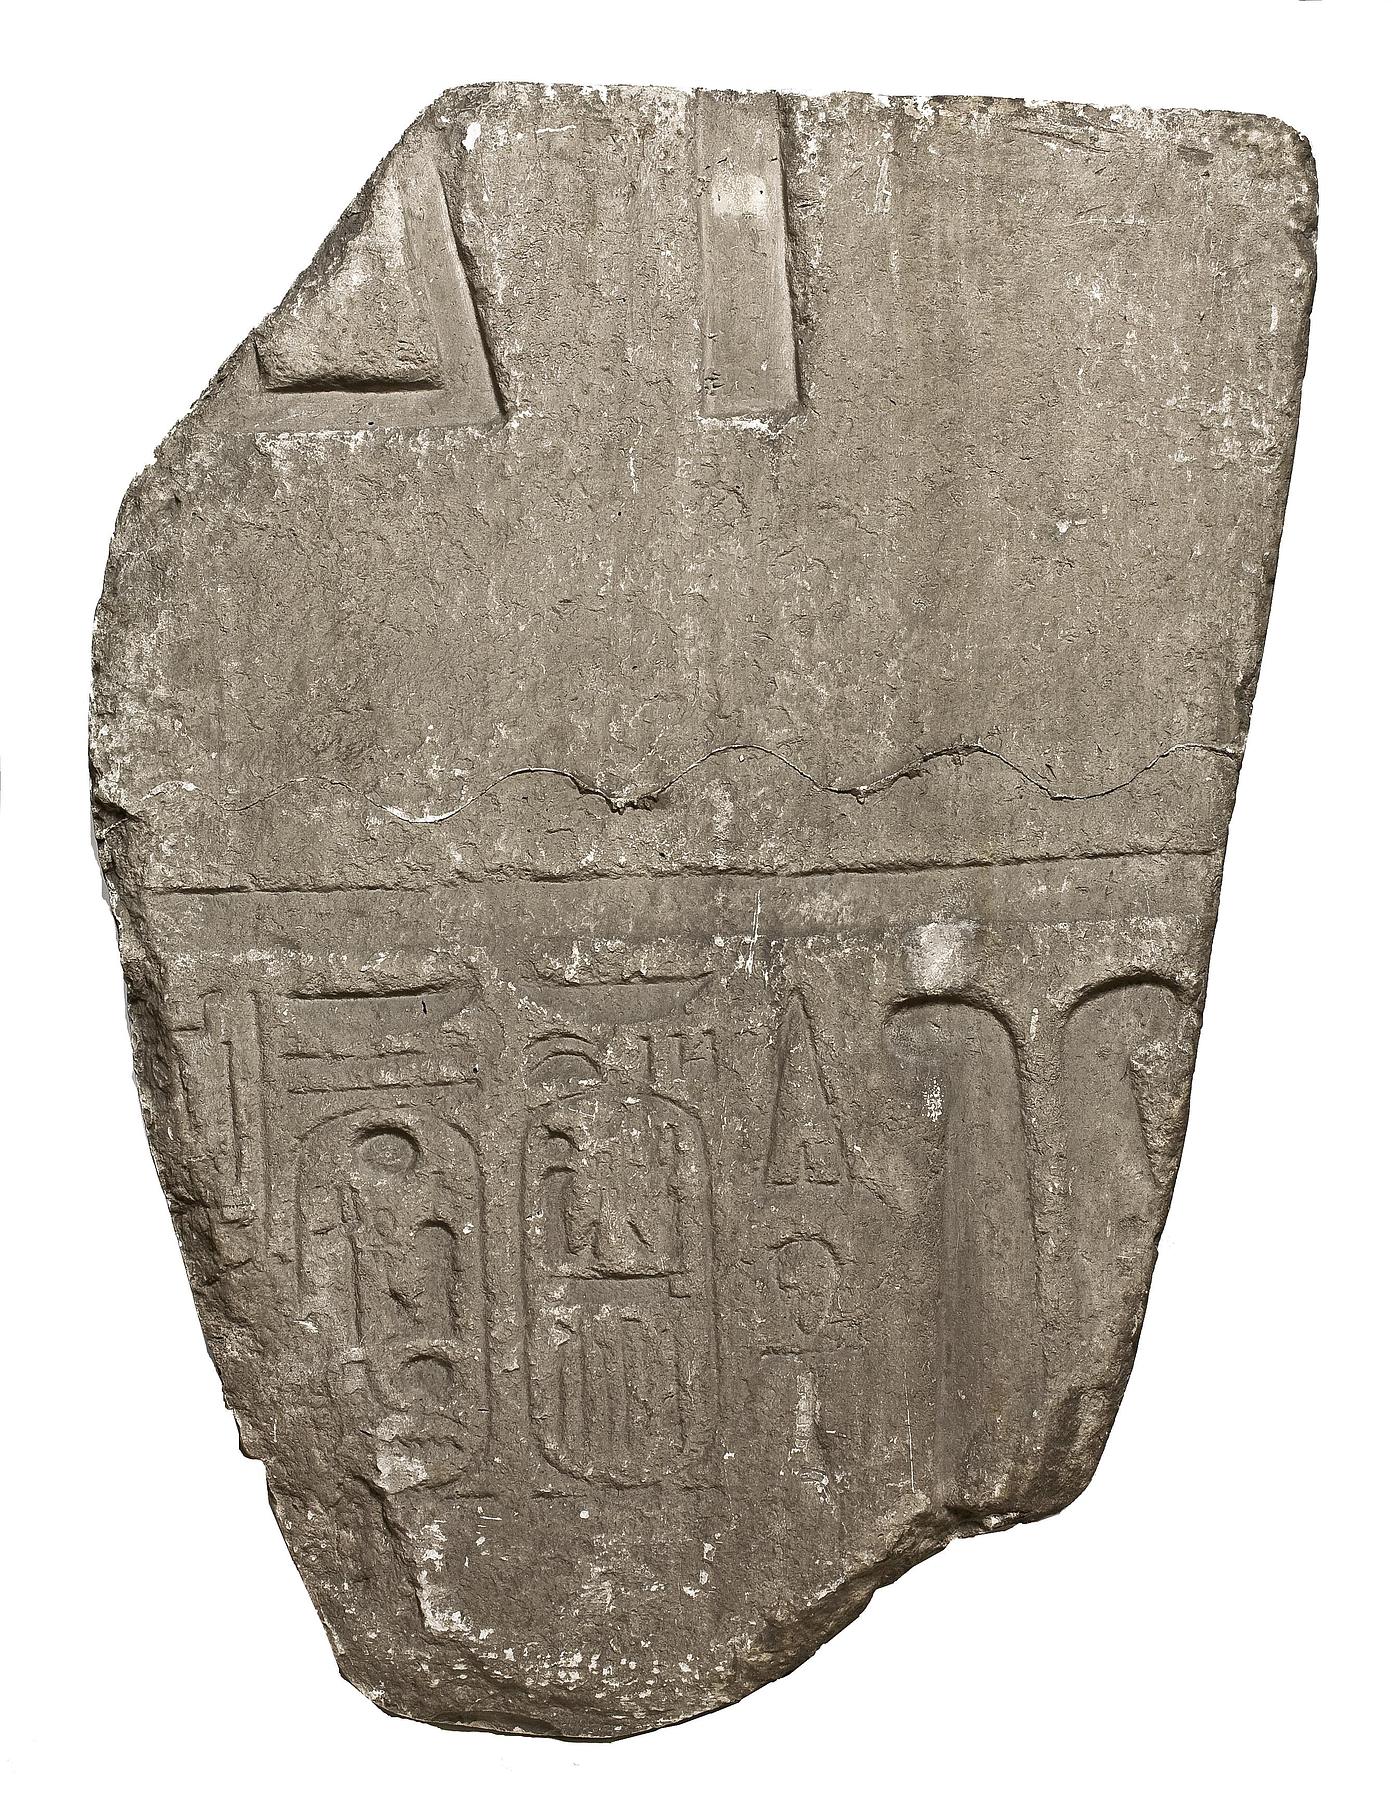 Cartouches with portraits of Ramses II, L254